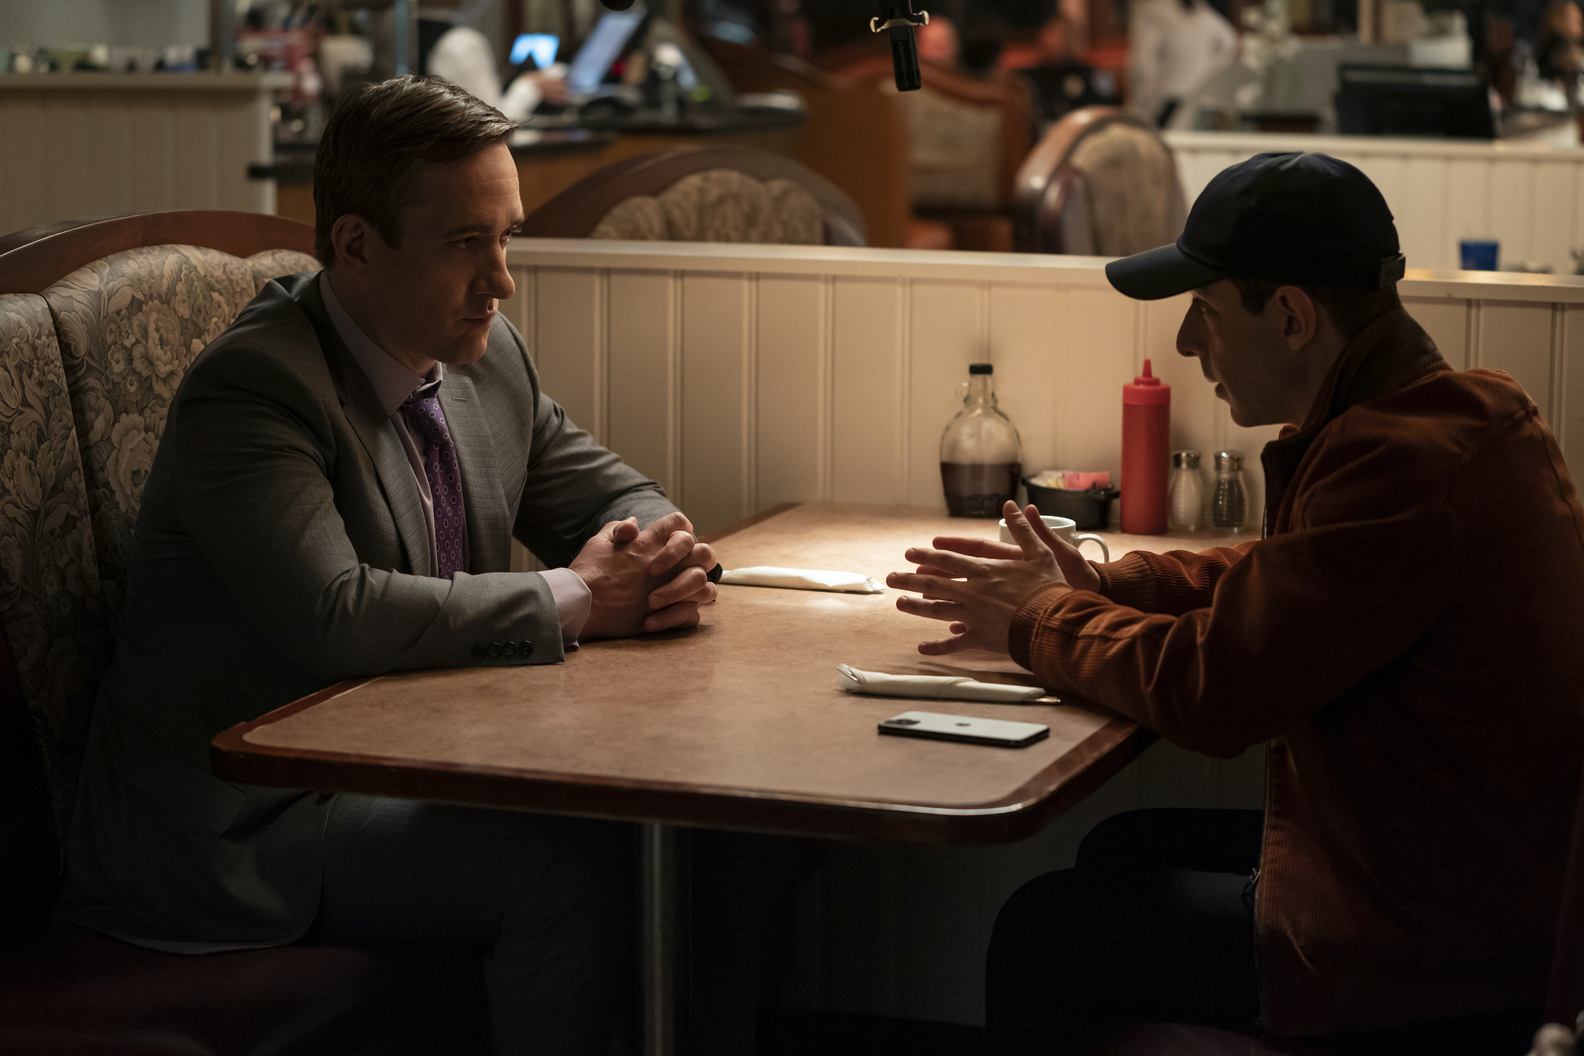 Two men, one in a gray suit and the other in a brown coat and baseball hat, face each other in an upholstered diner booth.